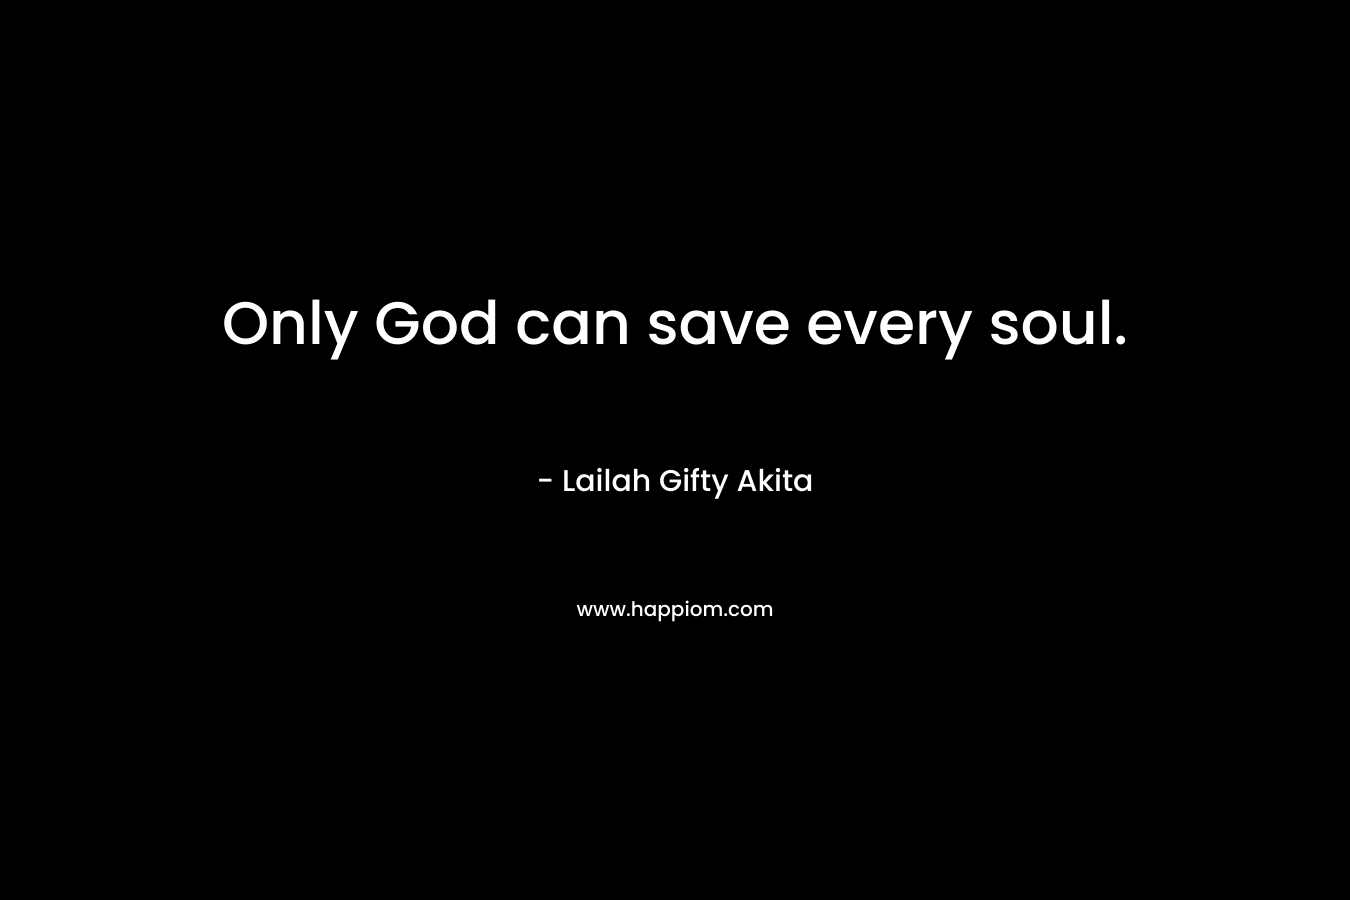 Only God can save every soul.